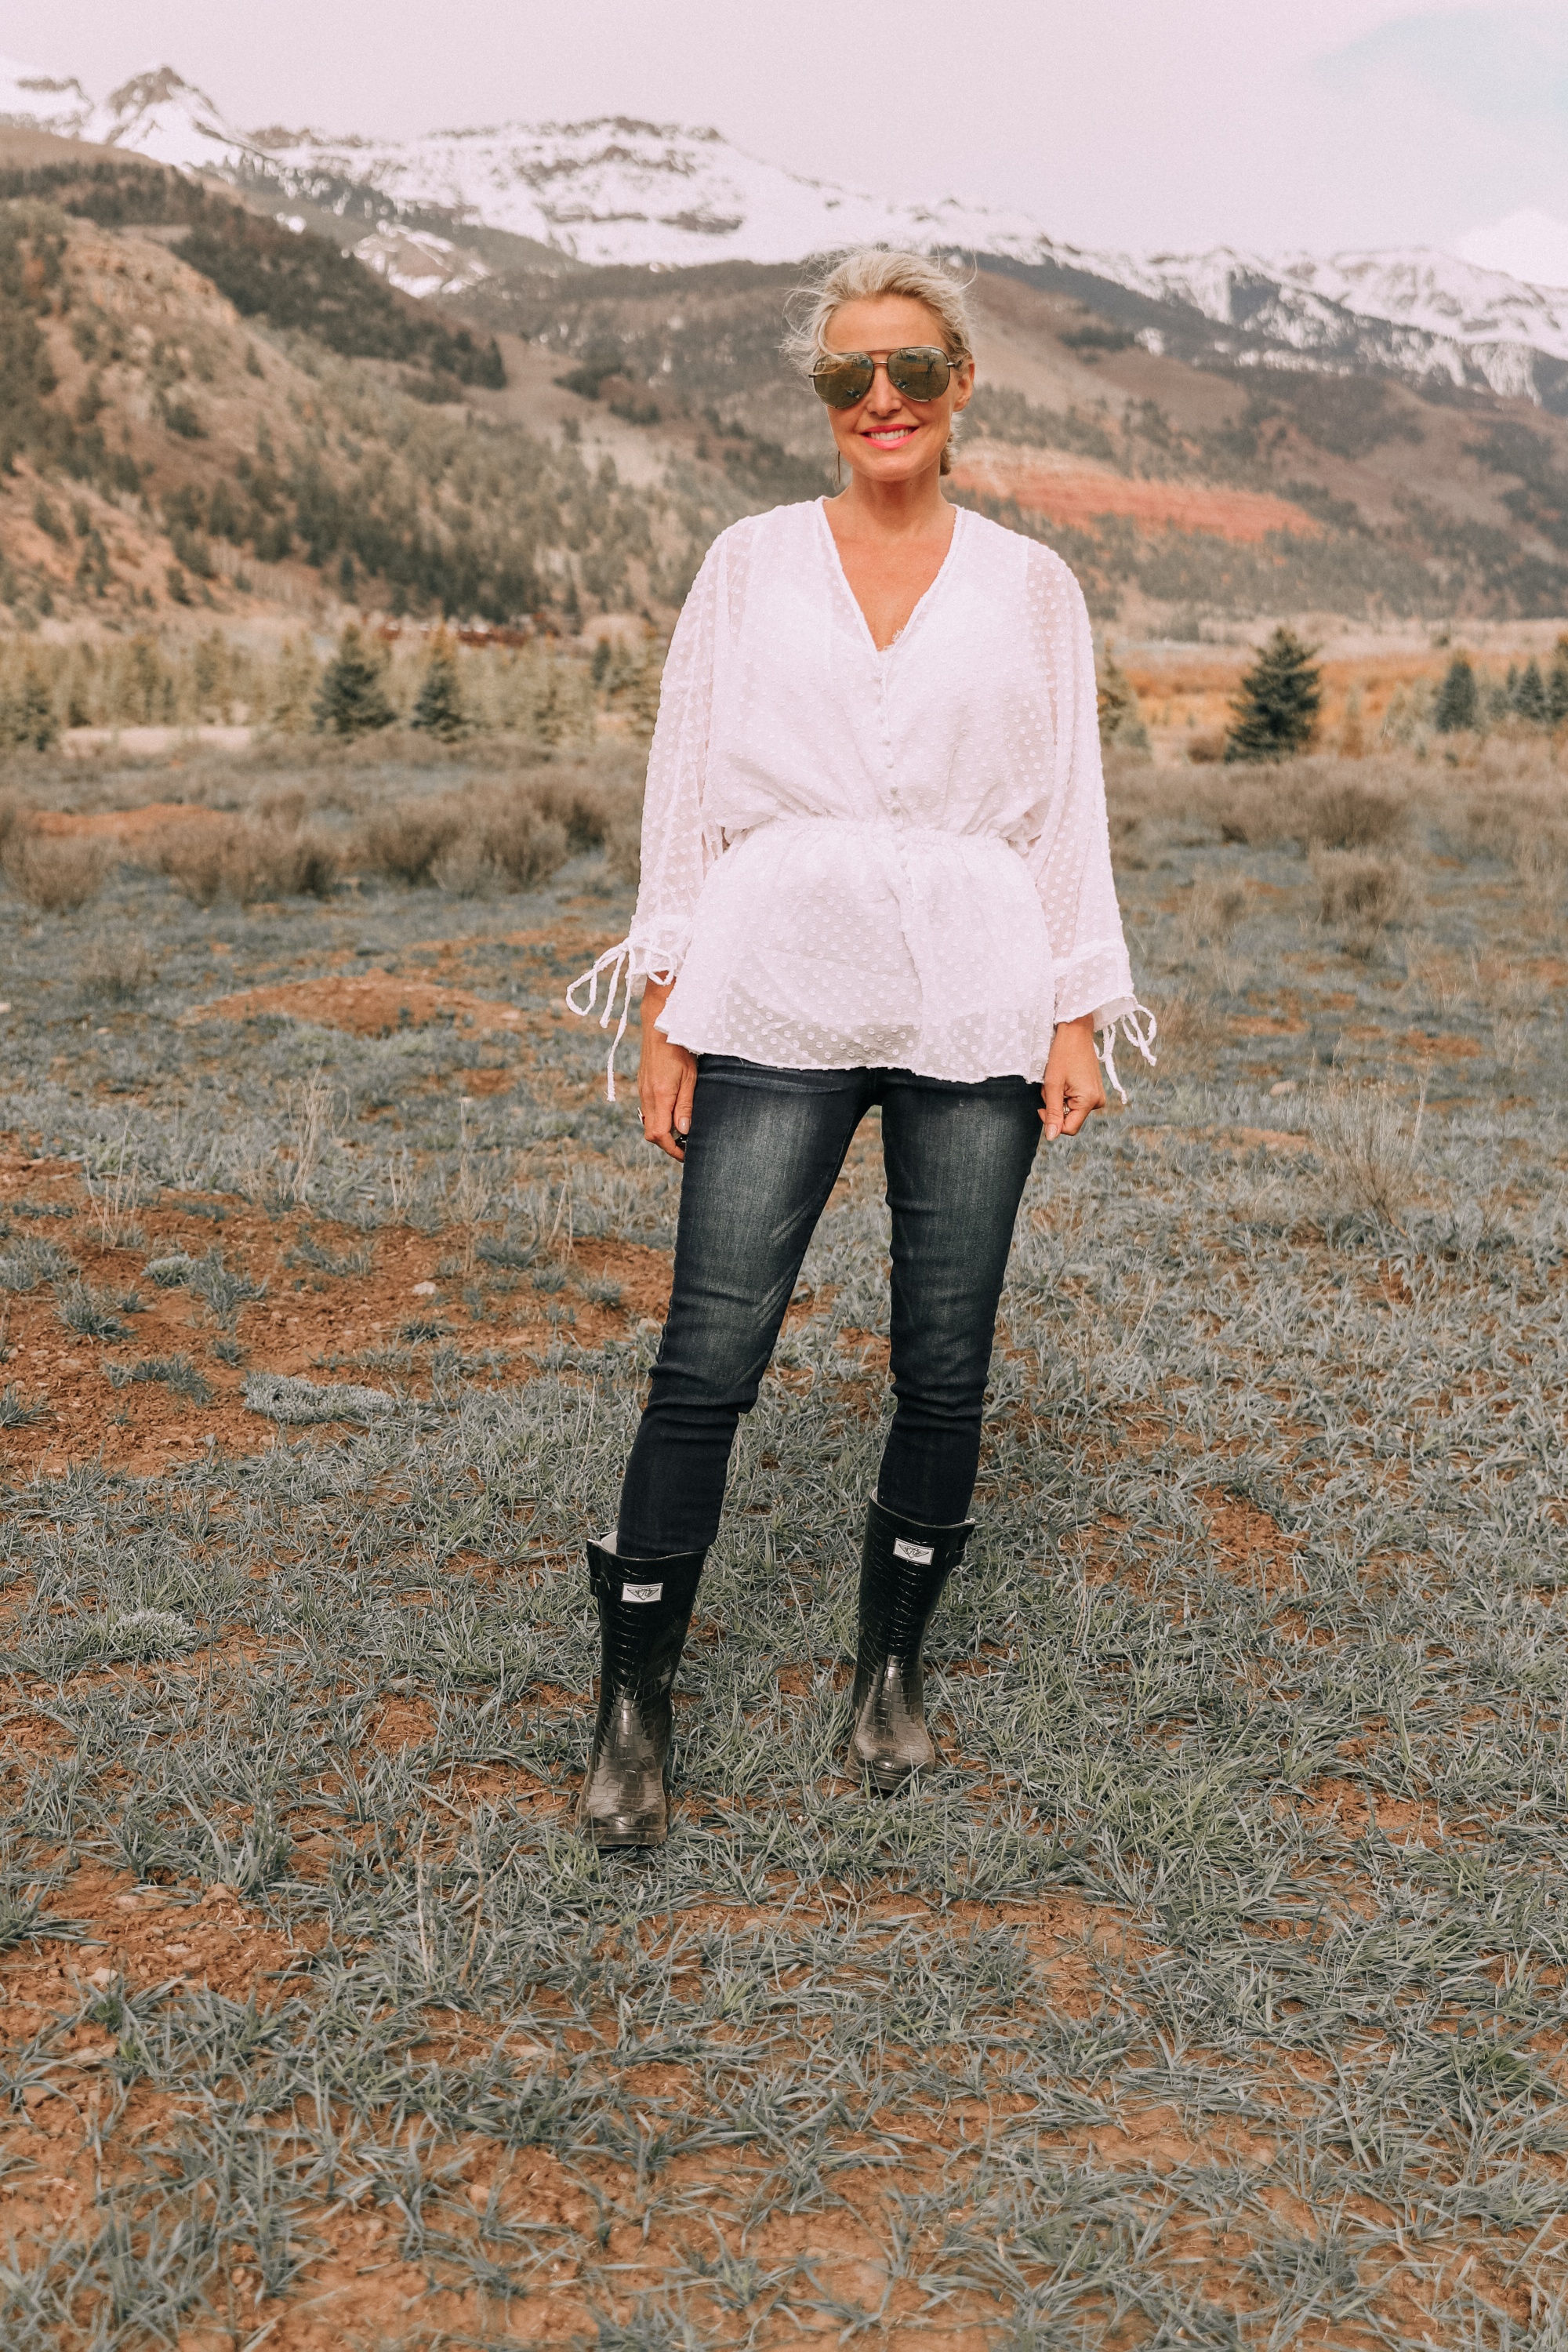 fashion blogger erin busbee in telluride colorado wearing white cinched blouse paired with dark wash skinny ankle jeans styled with croc patterned rubber rain boots